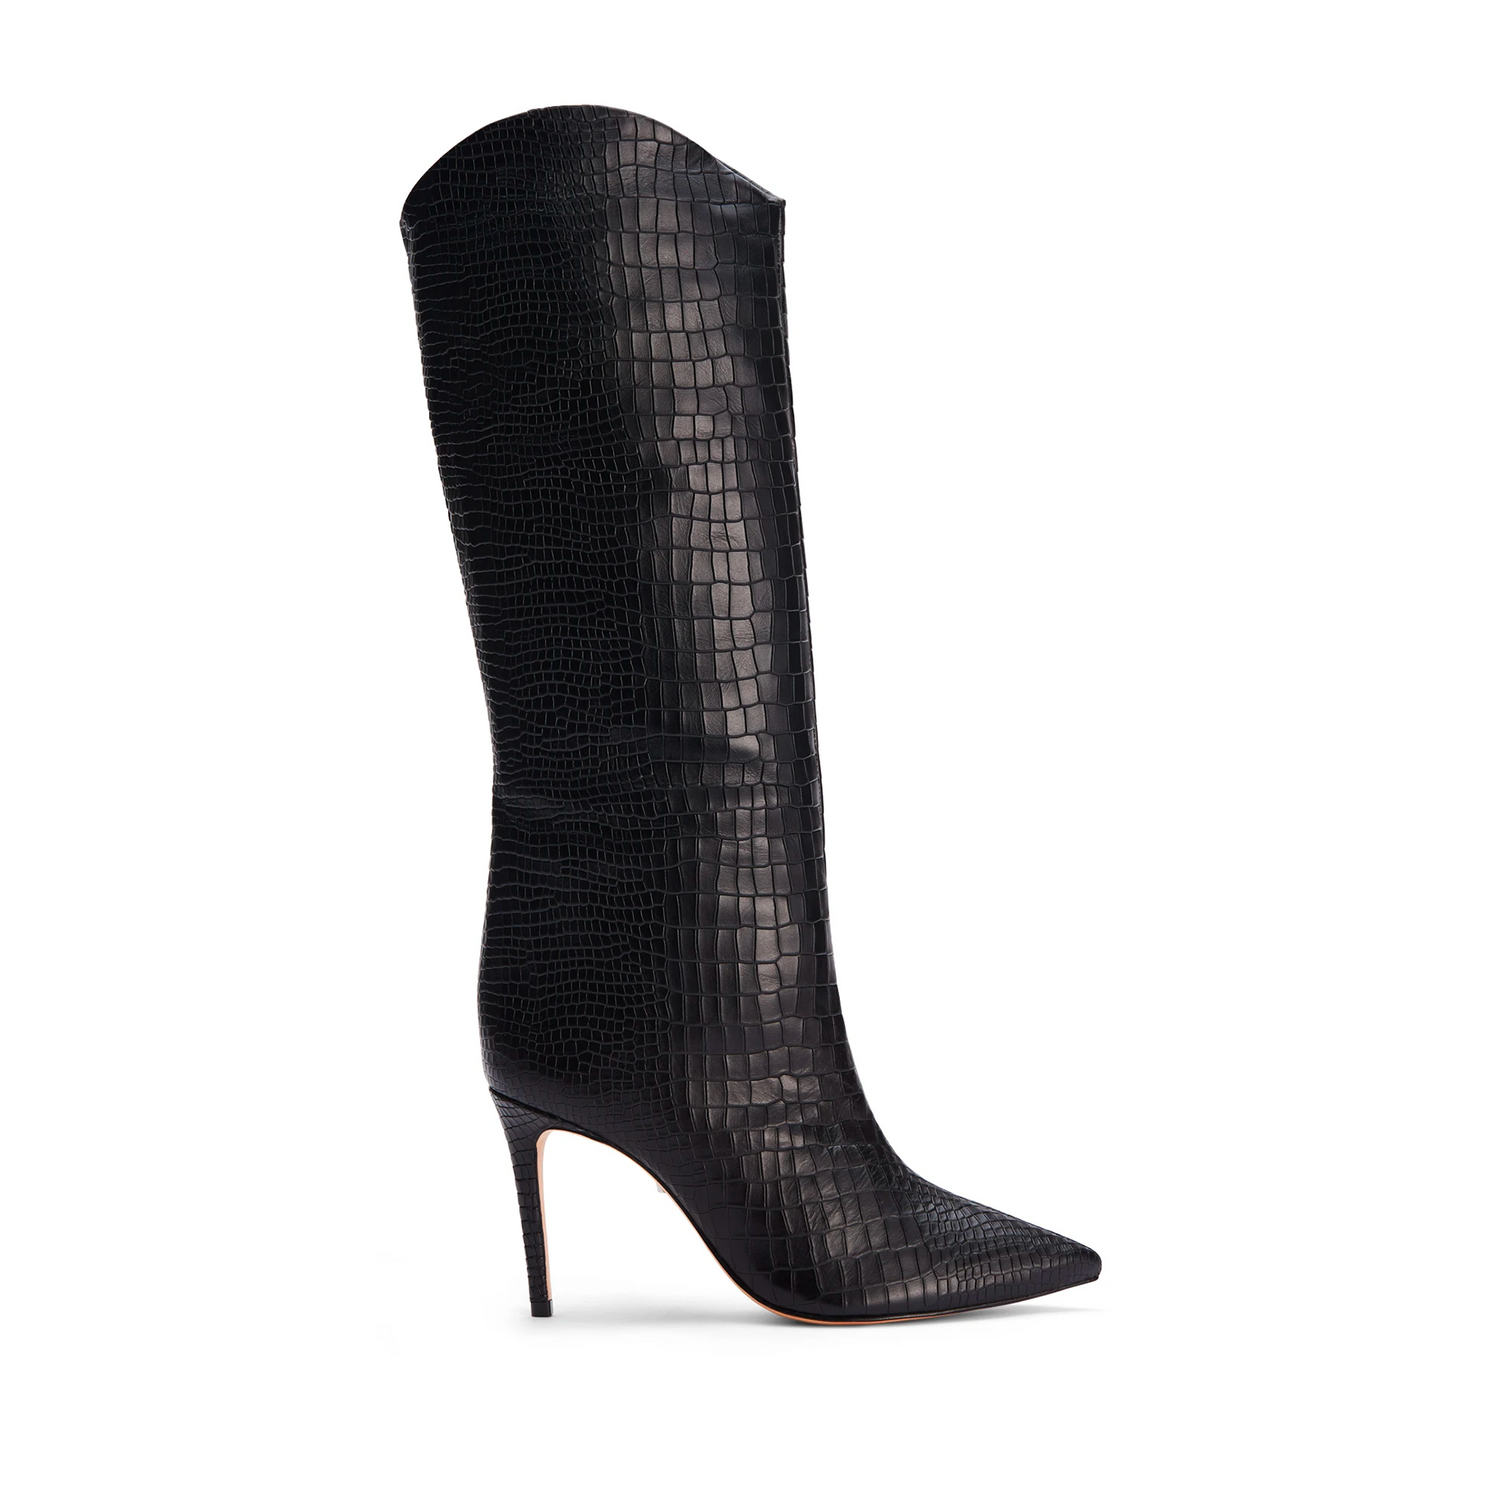 Maryana Boot Boots ESSENTIAL 5 Black Crocodile Embossed Leather - Schutz Shoes